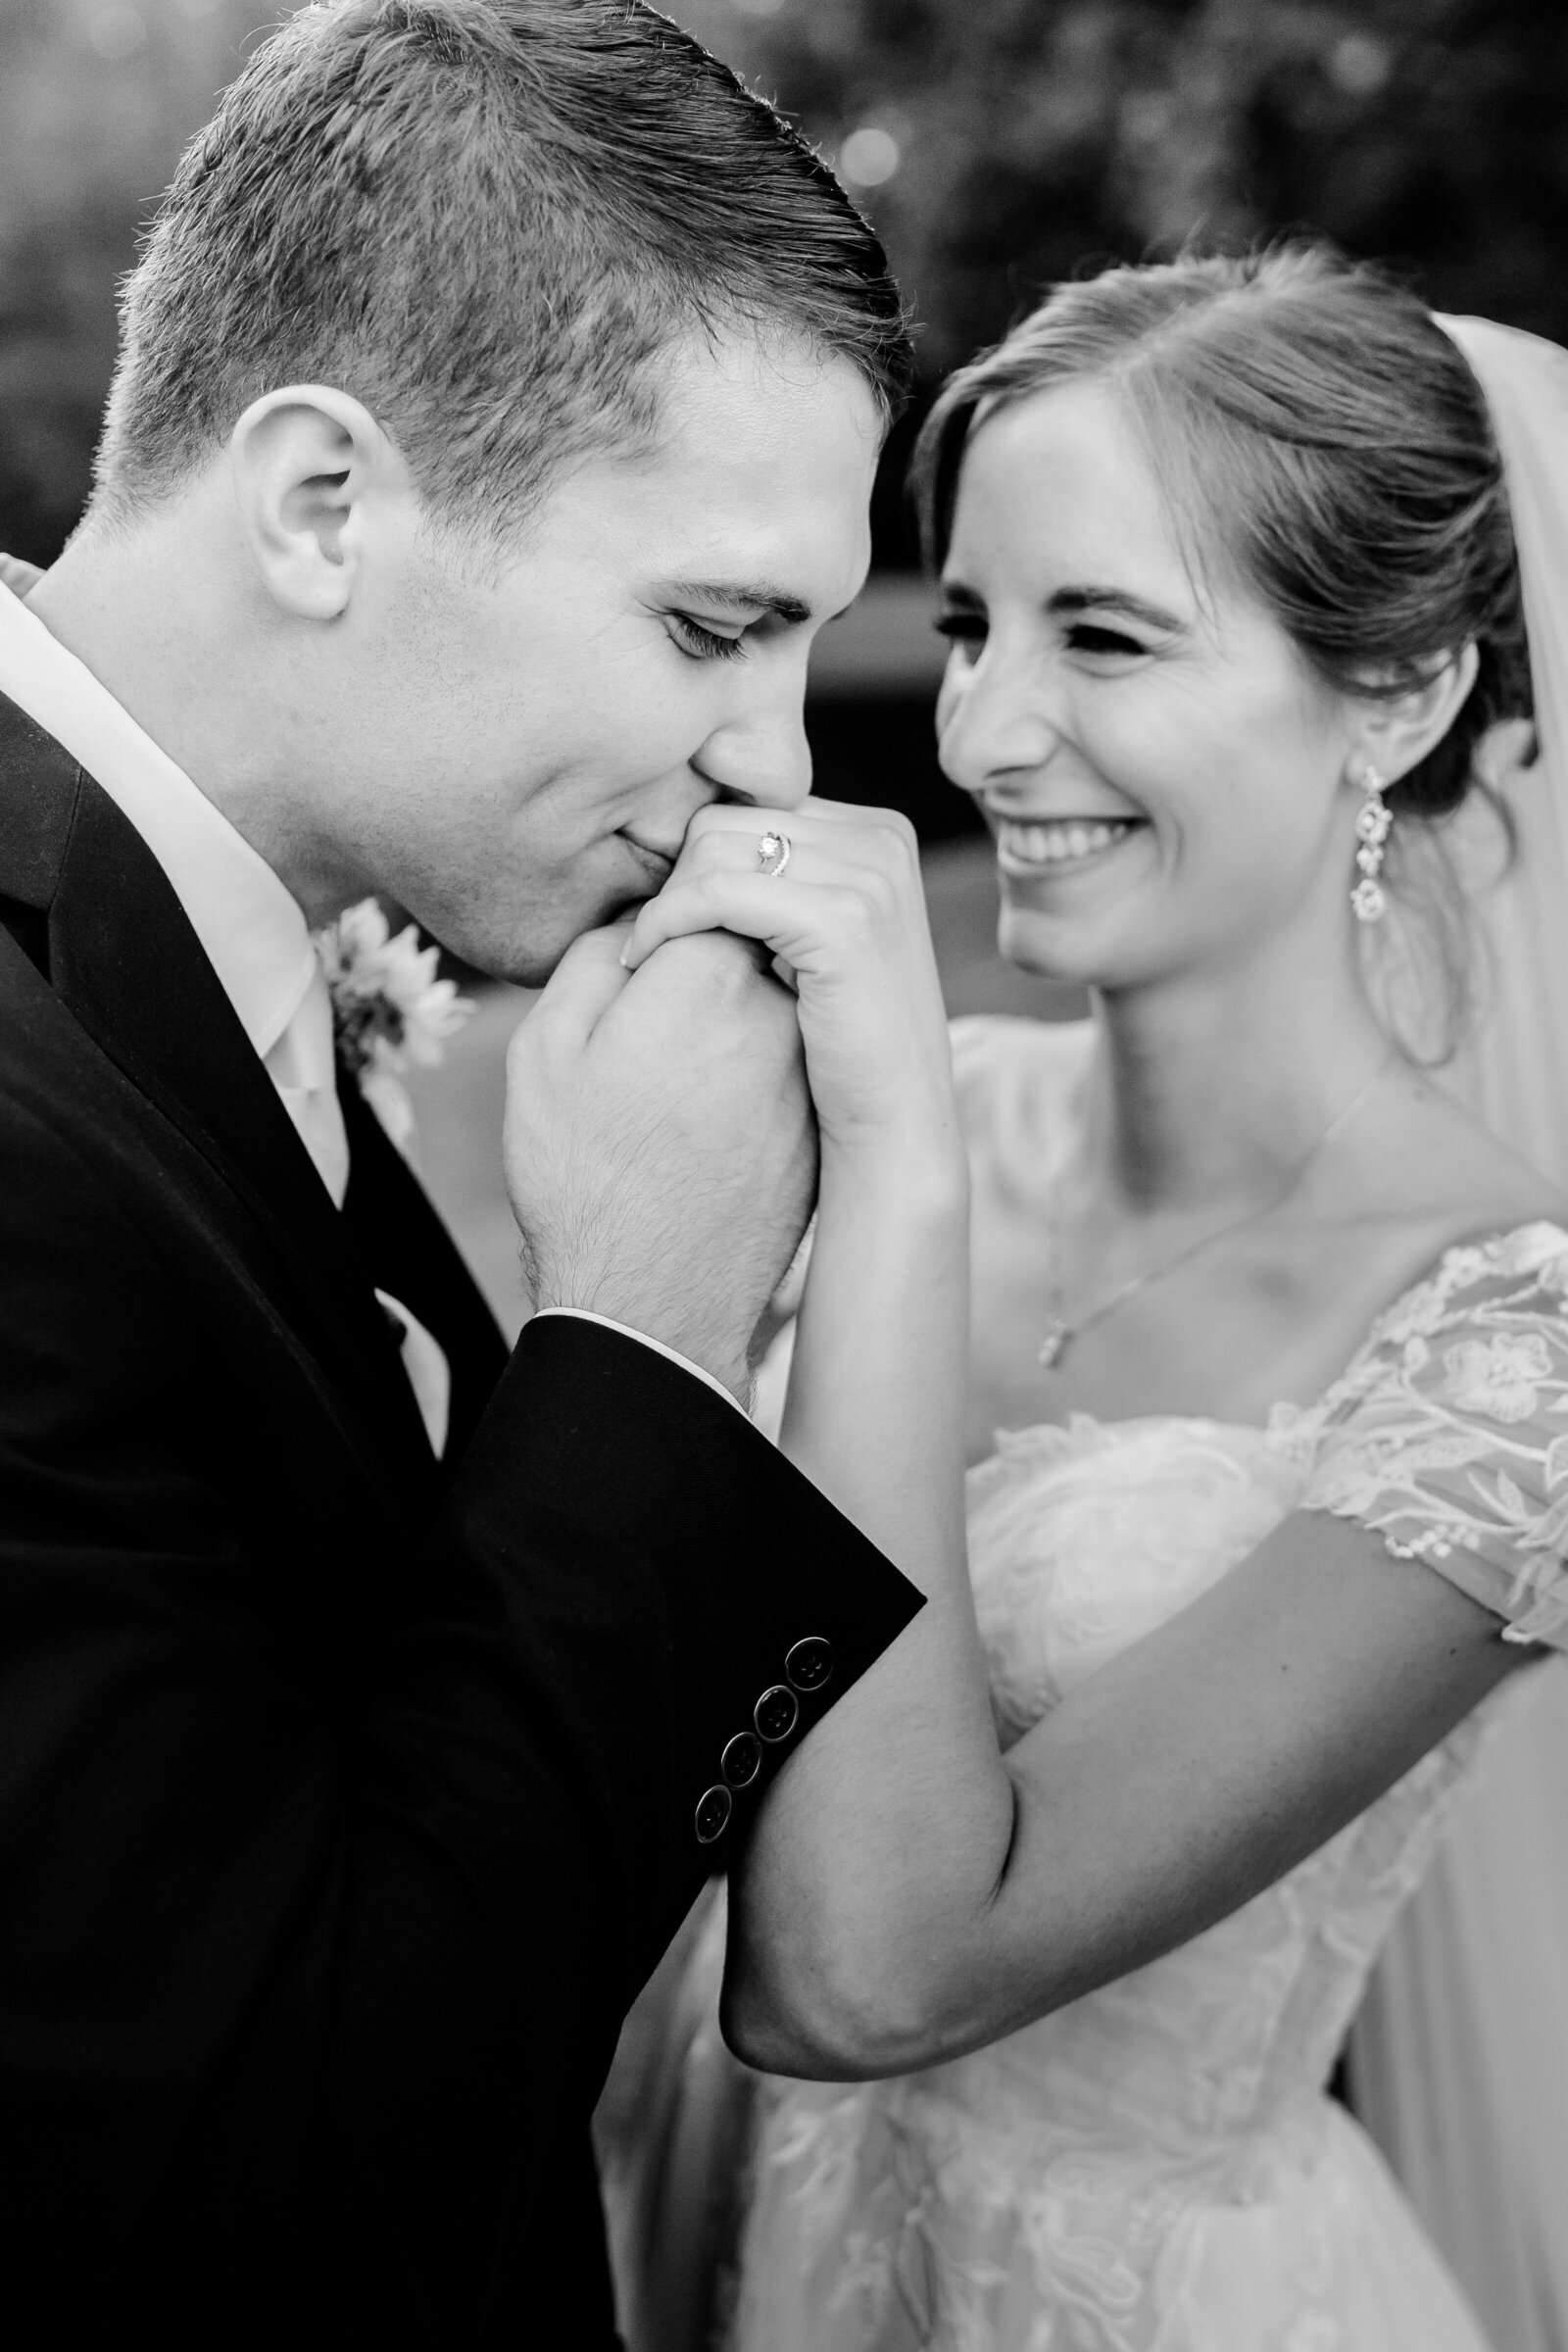 A groom kisses the hand of his bride during their Catholic wedding in Northern Virginia